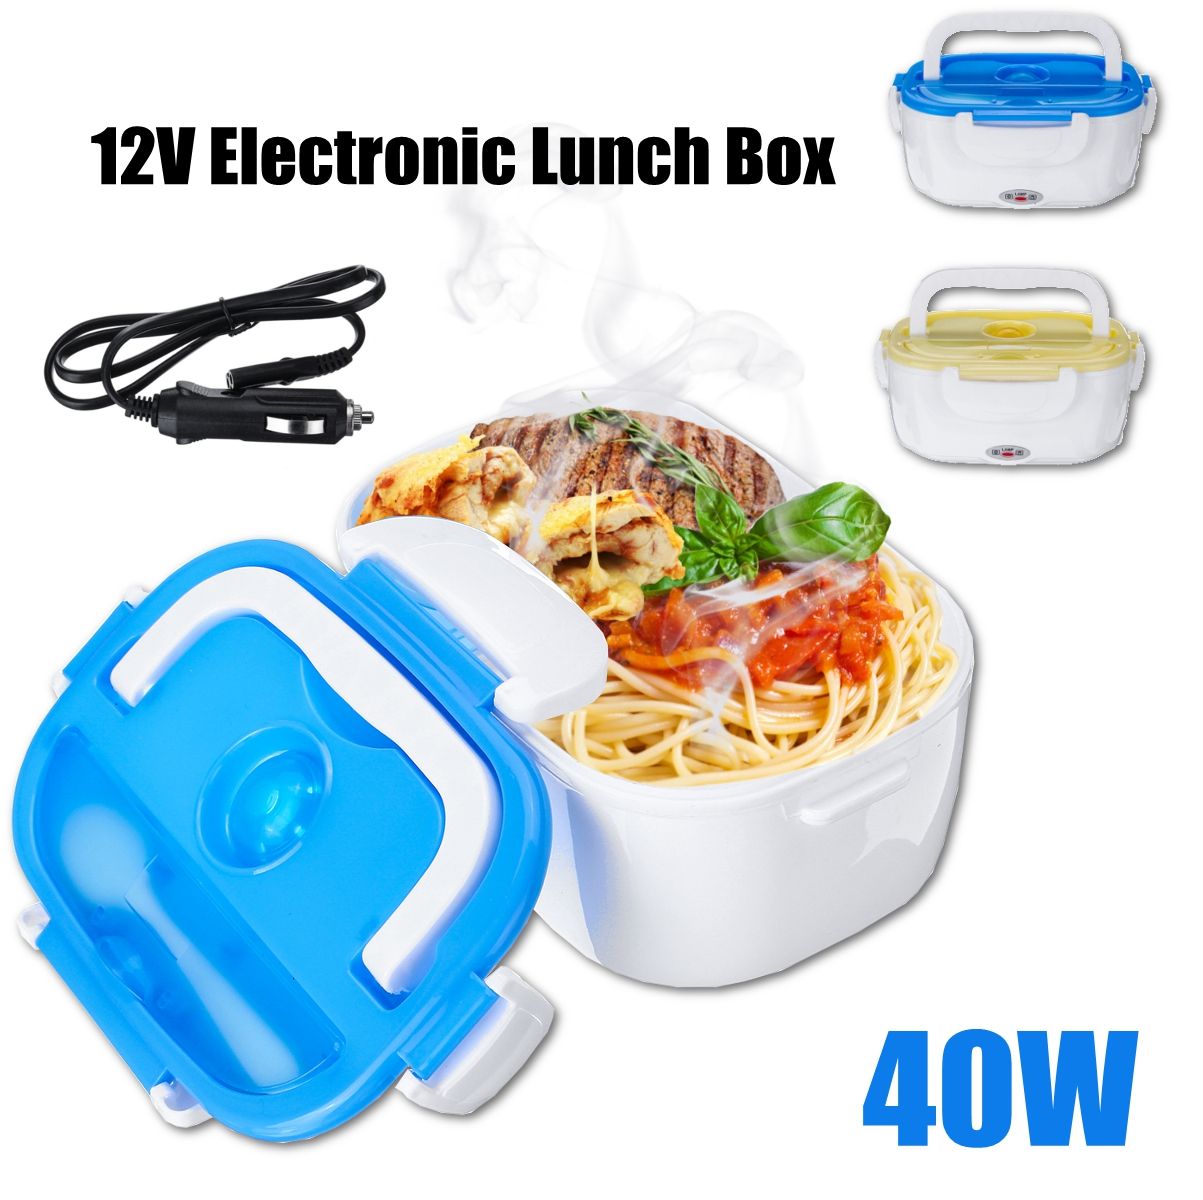 Portable-12V-105L-Heated-Electric-Lunch-Box-Food-Warmer-Container-Car-Adapter-1570165